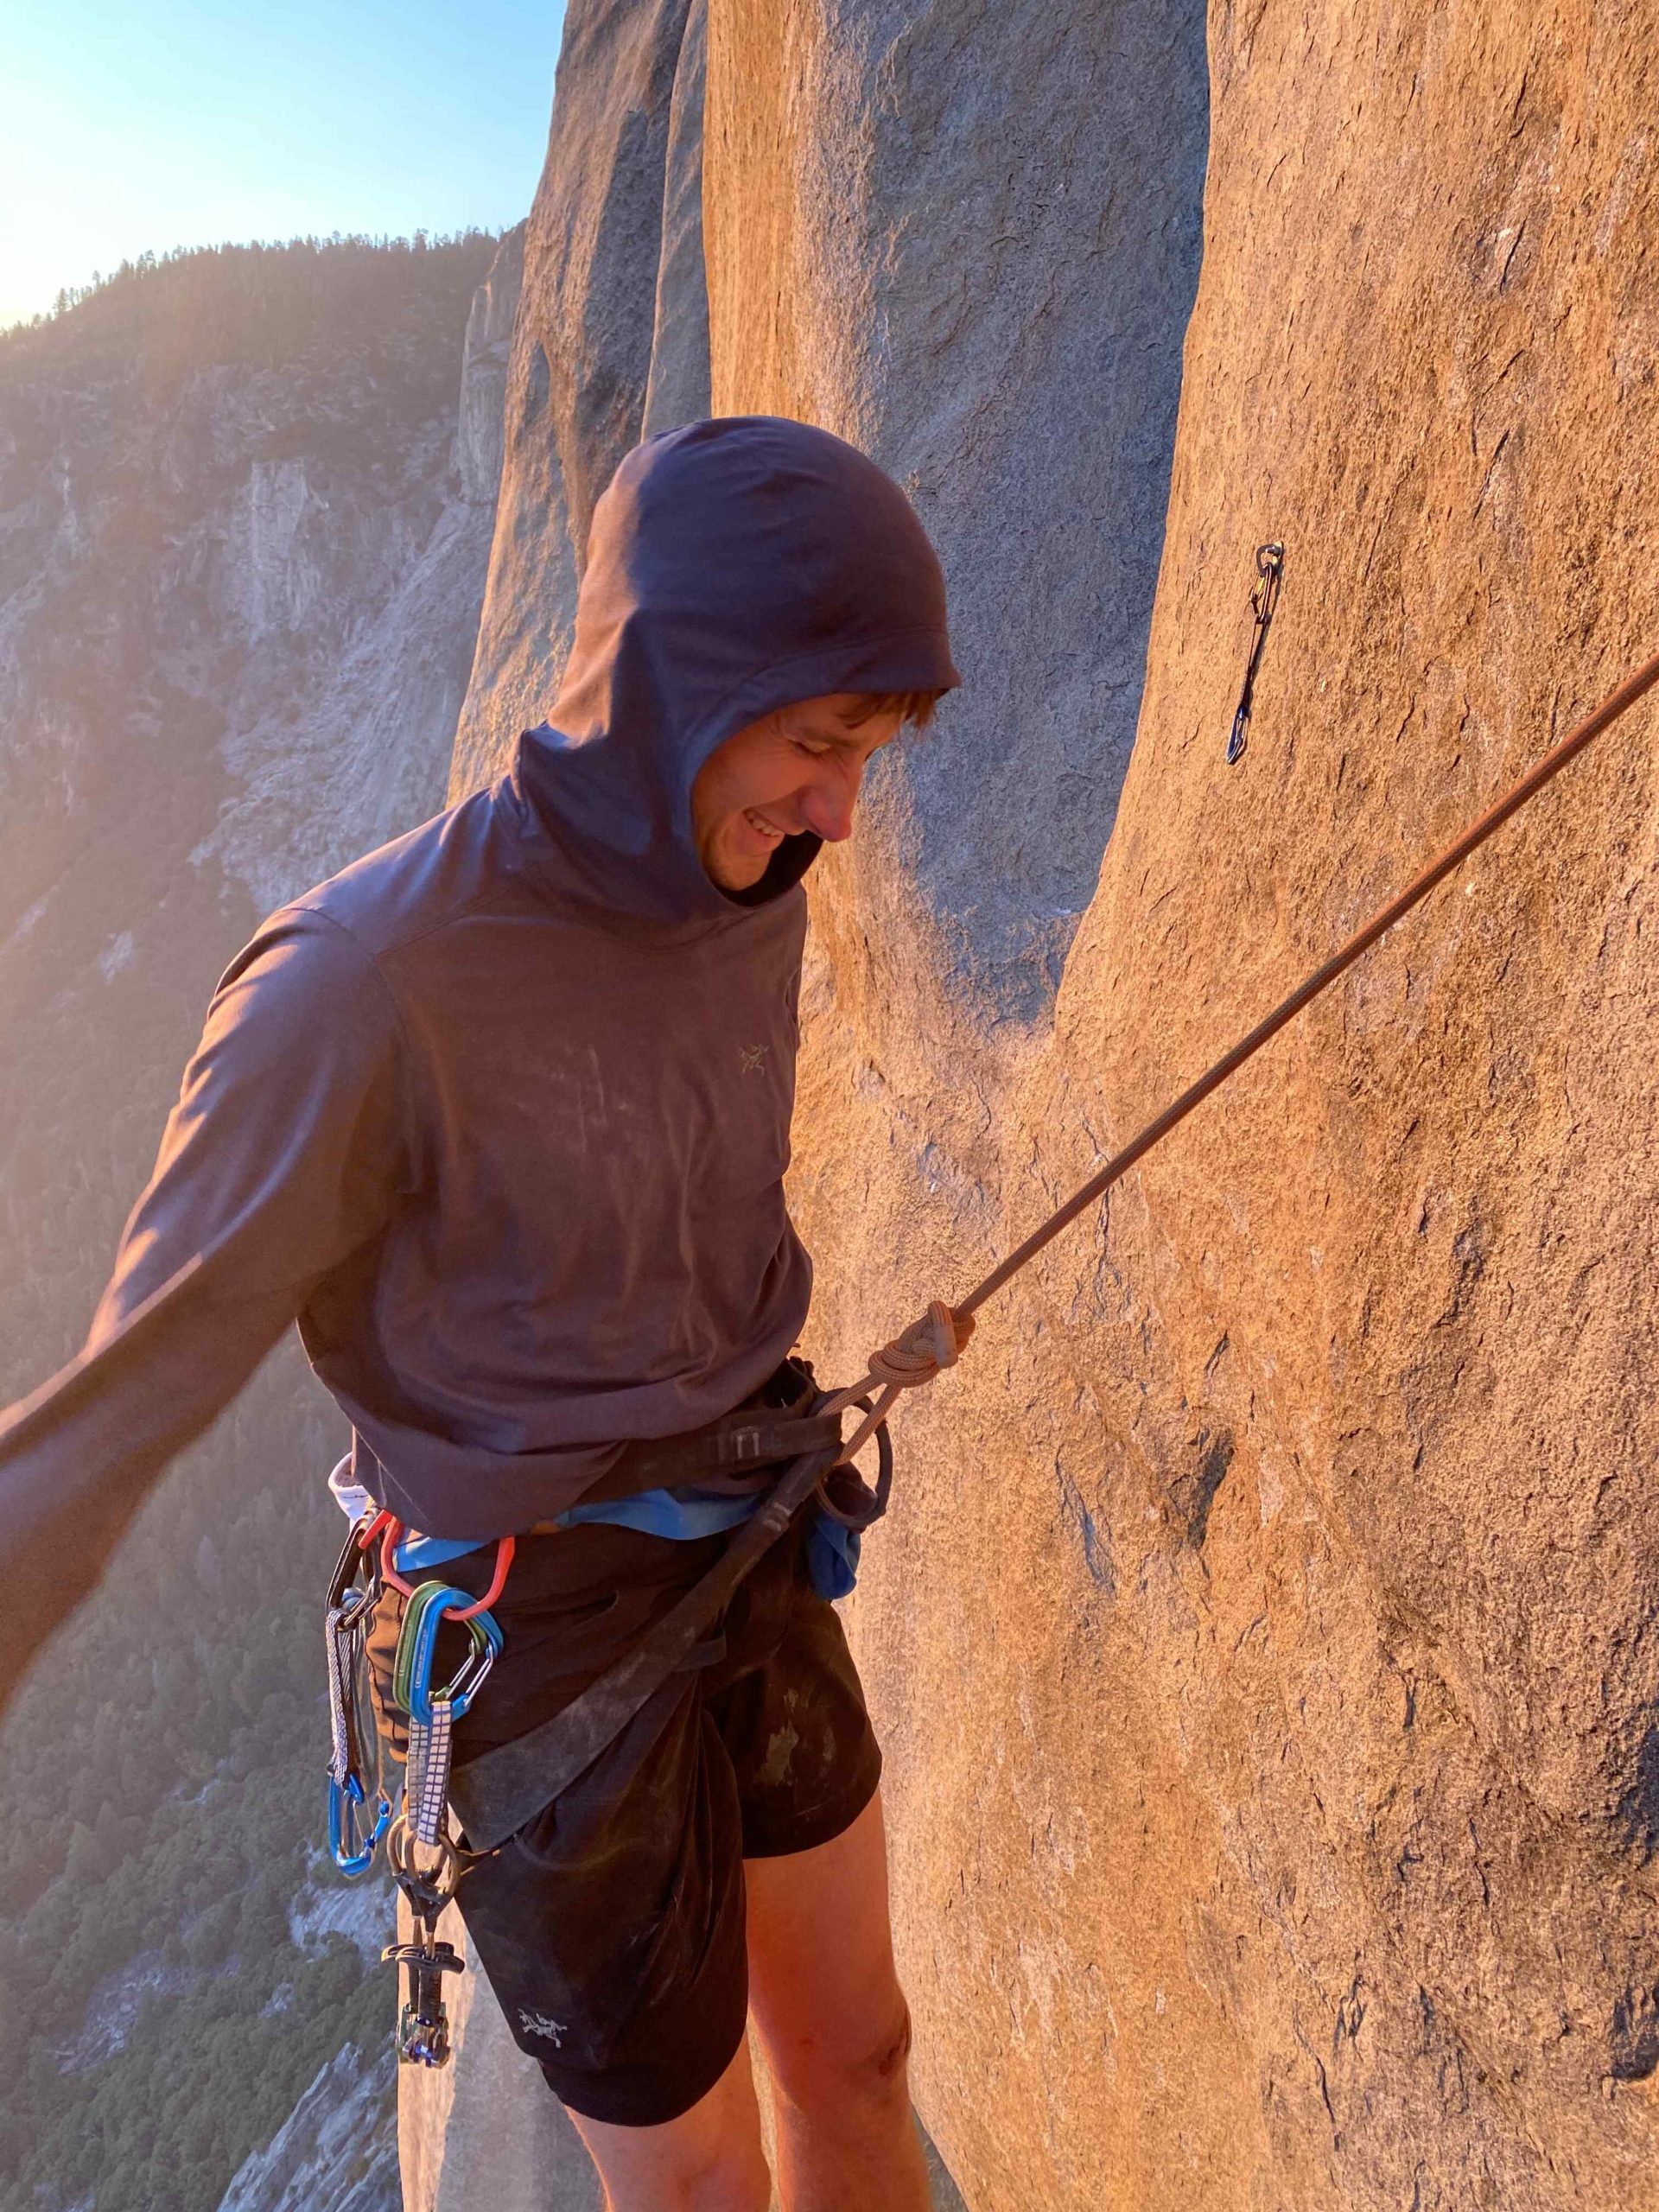 Jordan Cannon Sends 41-Pitch 5.13 in a - Gripped Magazine